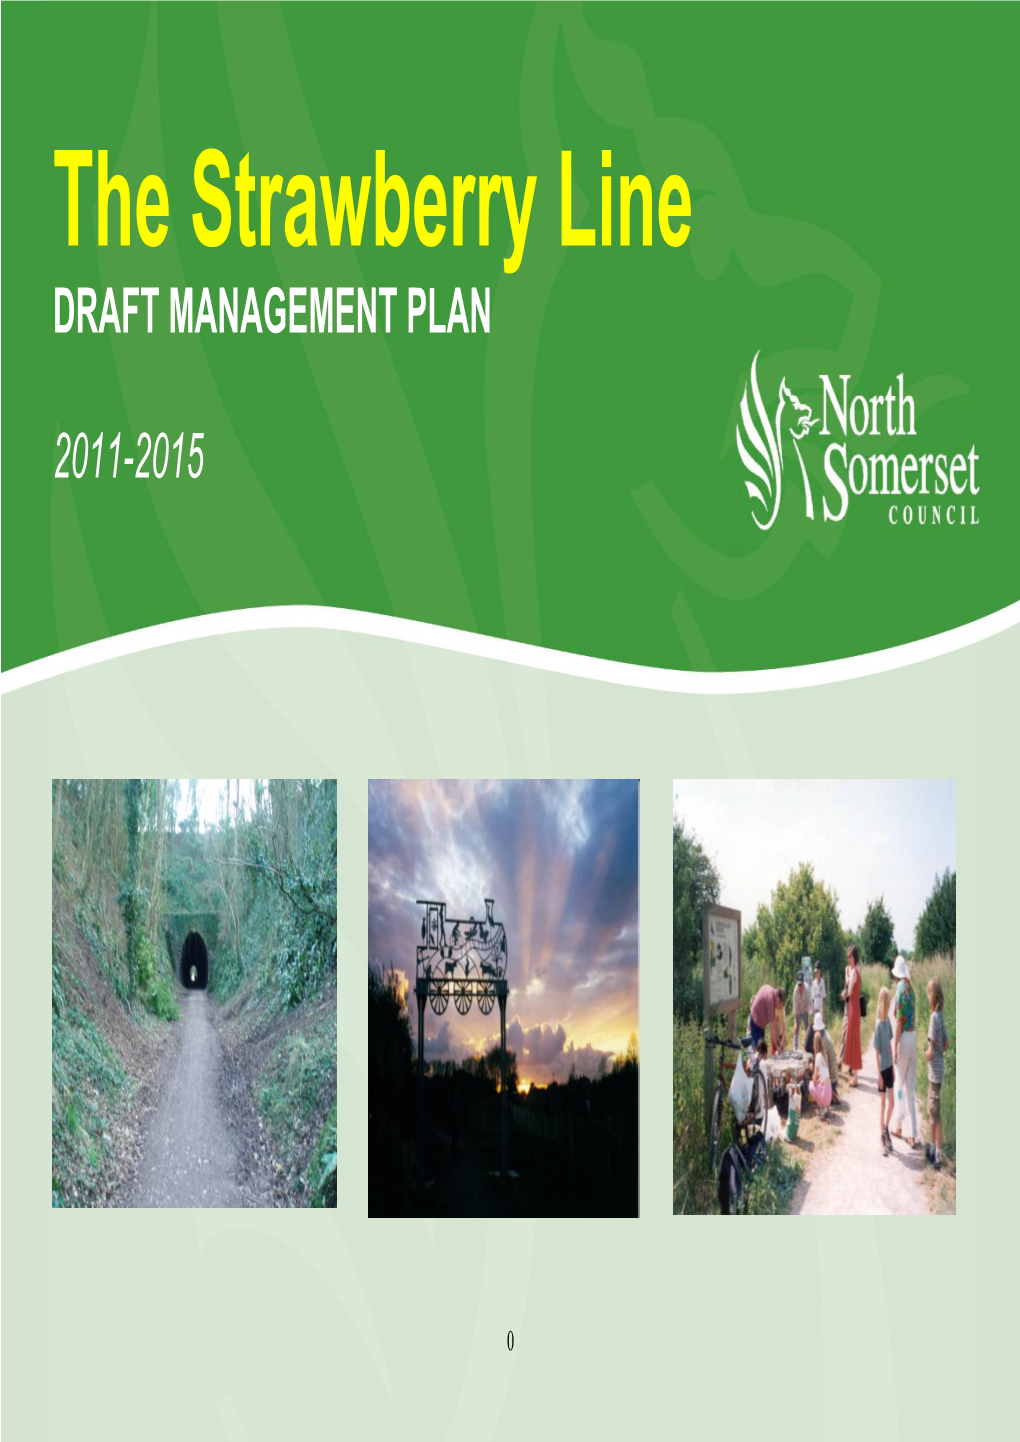 The Strawberry Line DRAFT MANAGEMENT PLAN